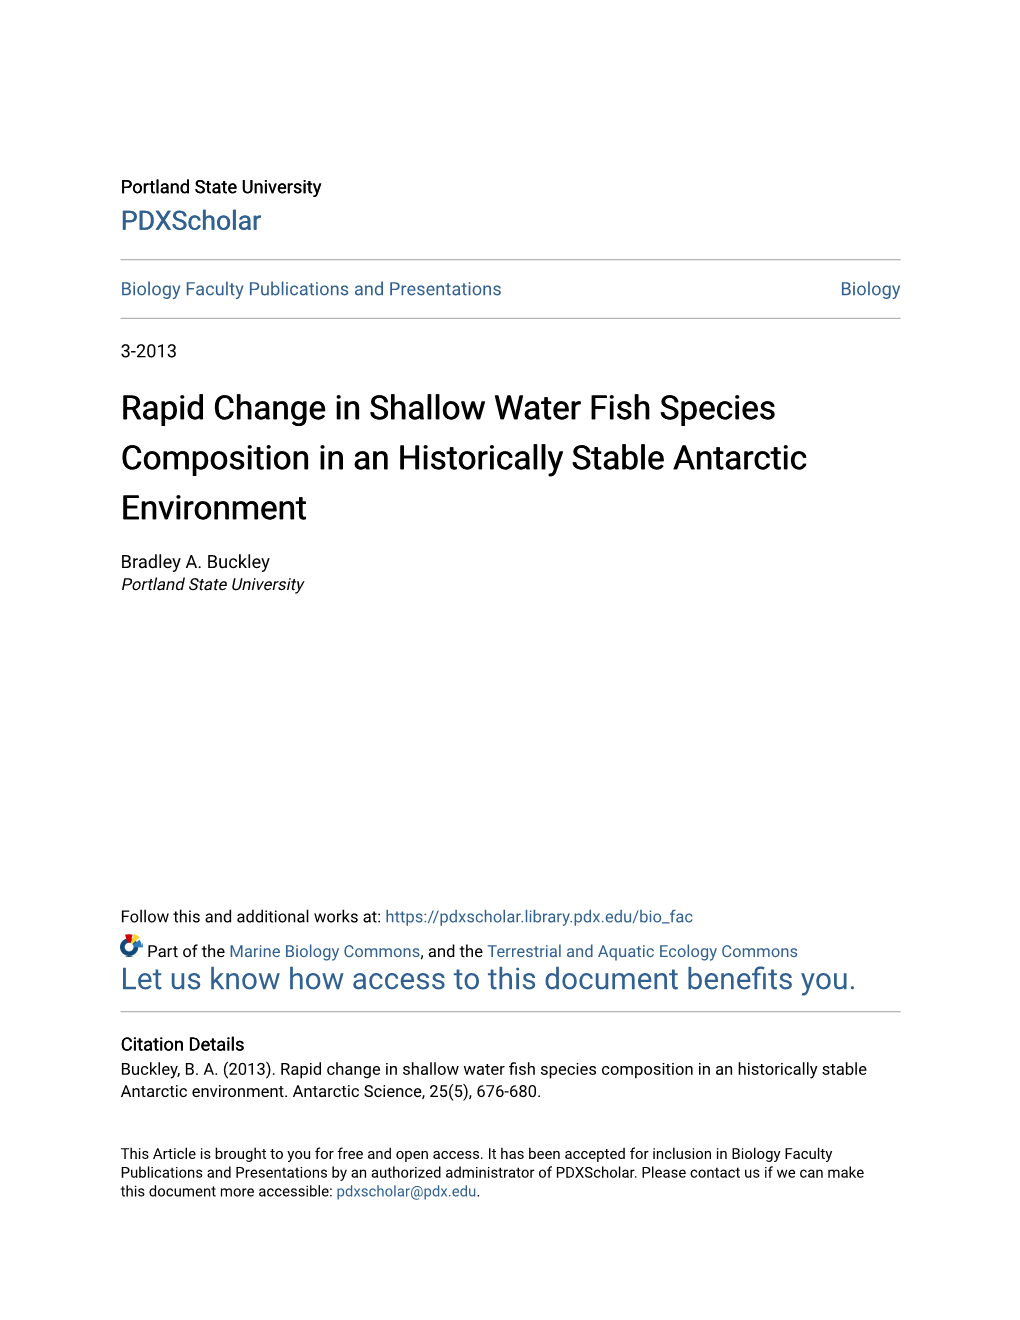 Rapid Change in Shallow Water Fish Species Composition in an Historically Stable Antarctic Environment